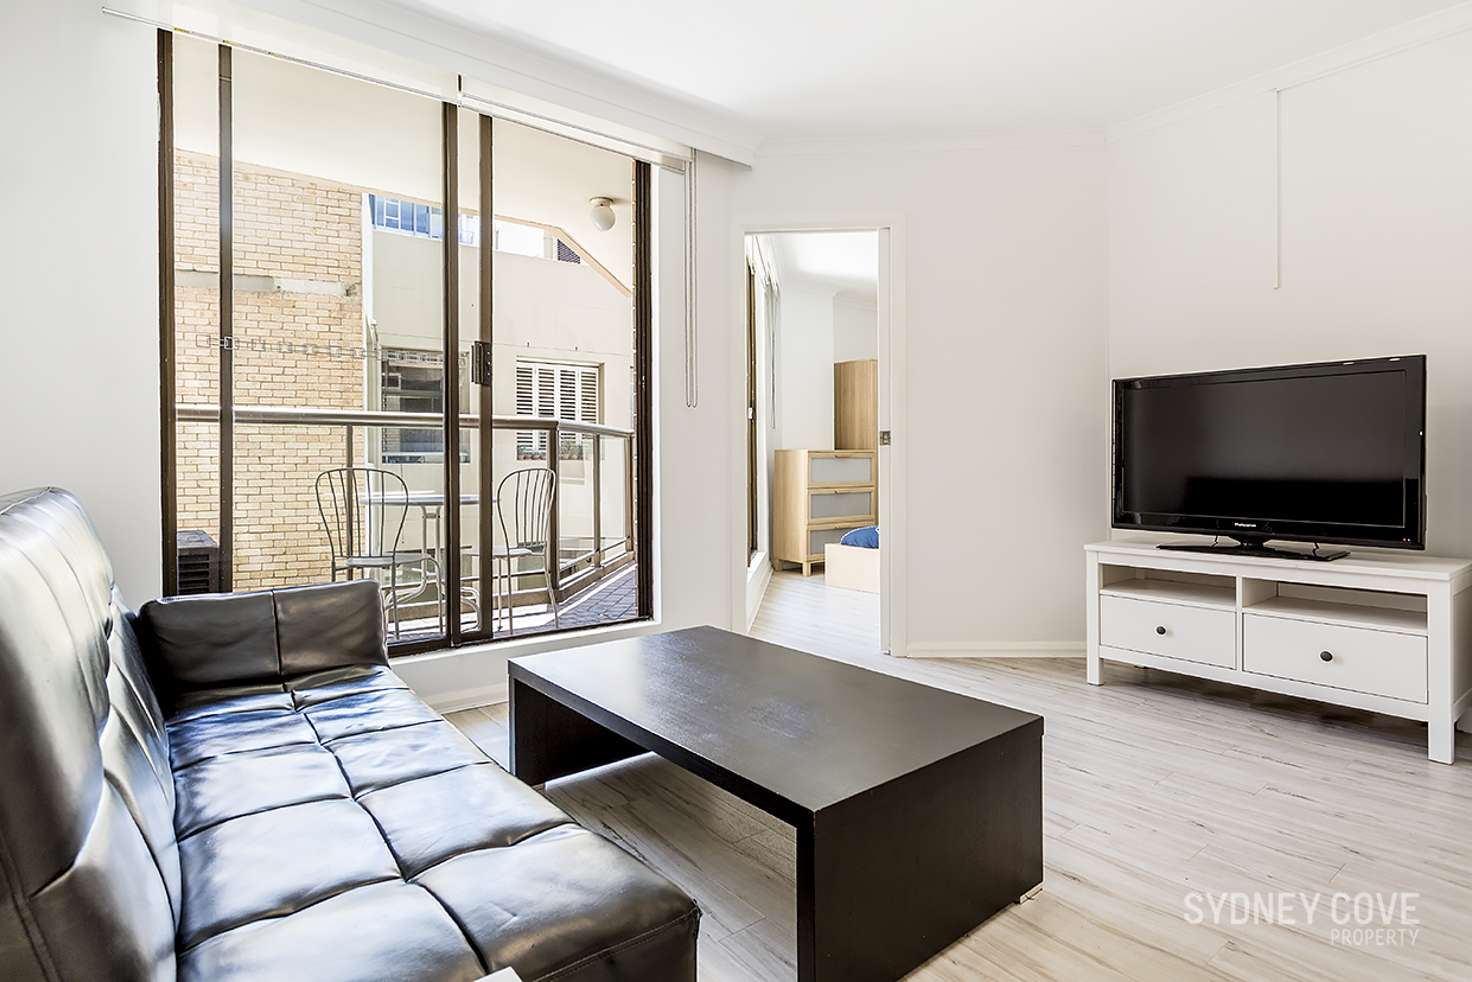 Main view of Homely apartment listing, 220 Goulburn St, Sydney NSW 2000